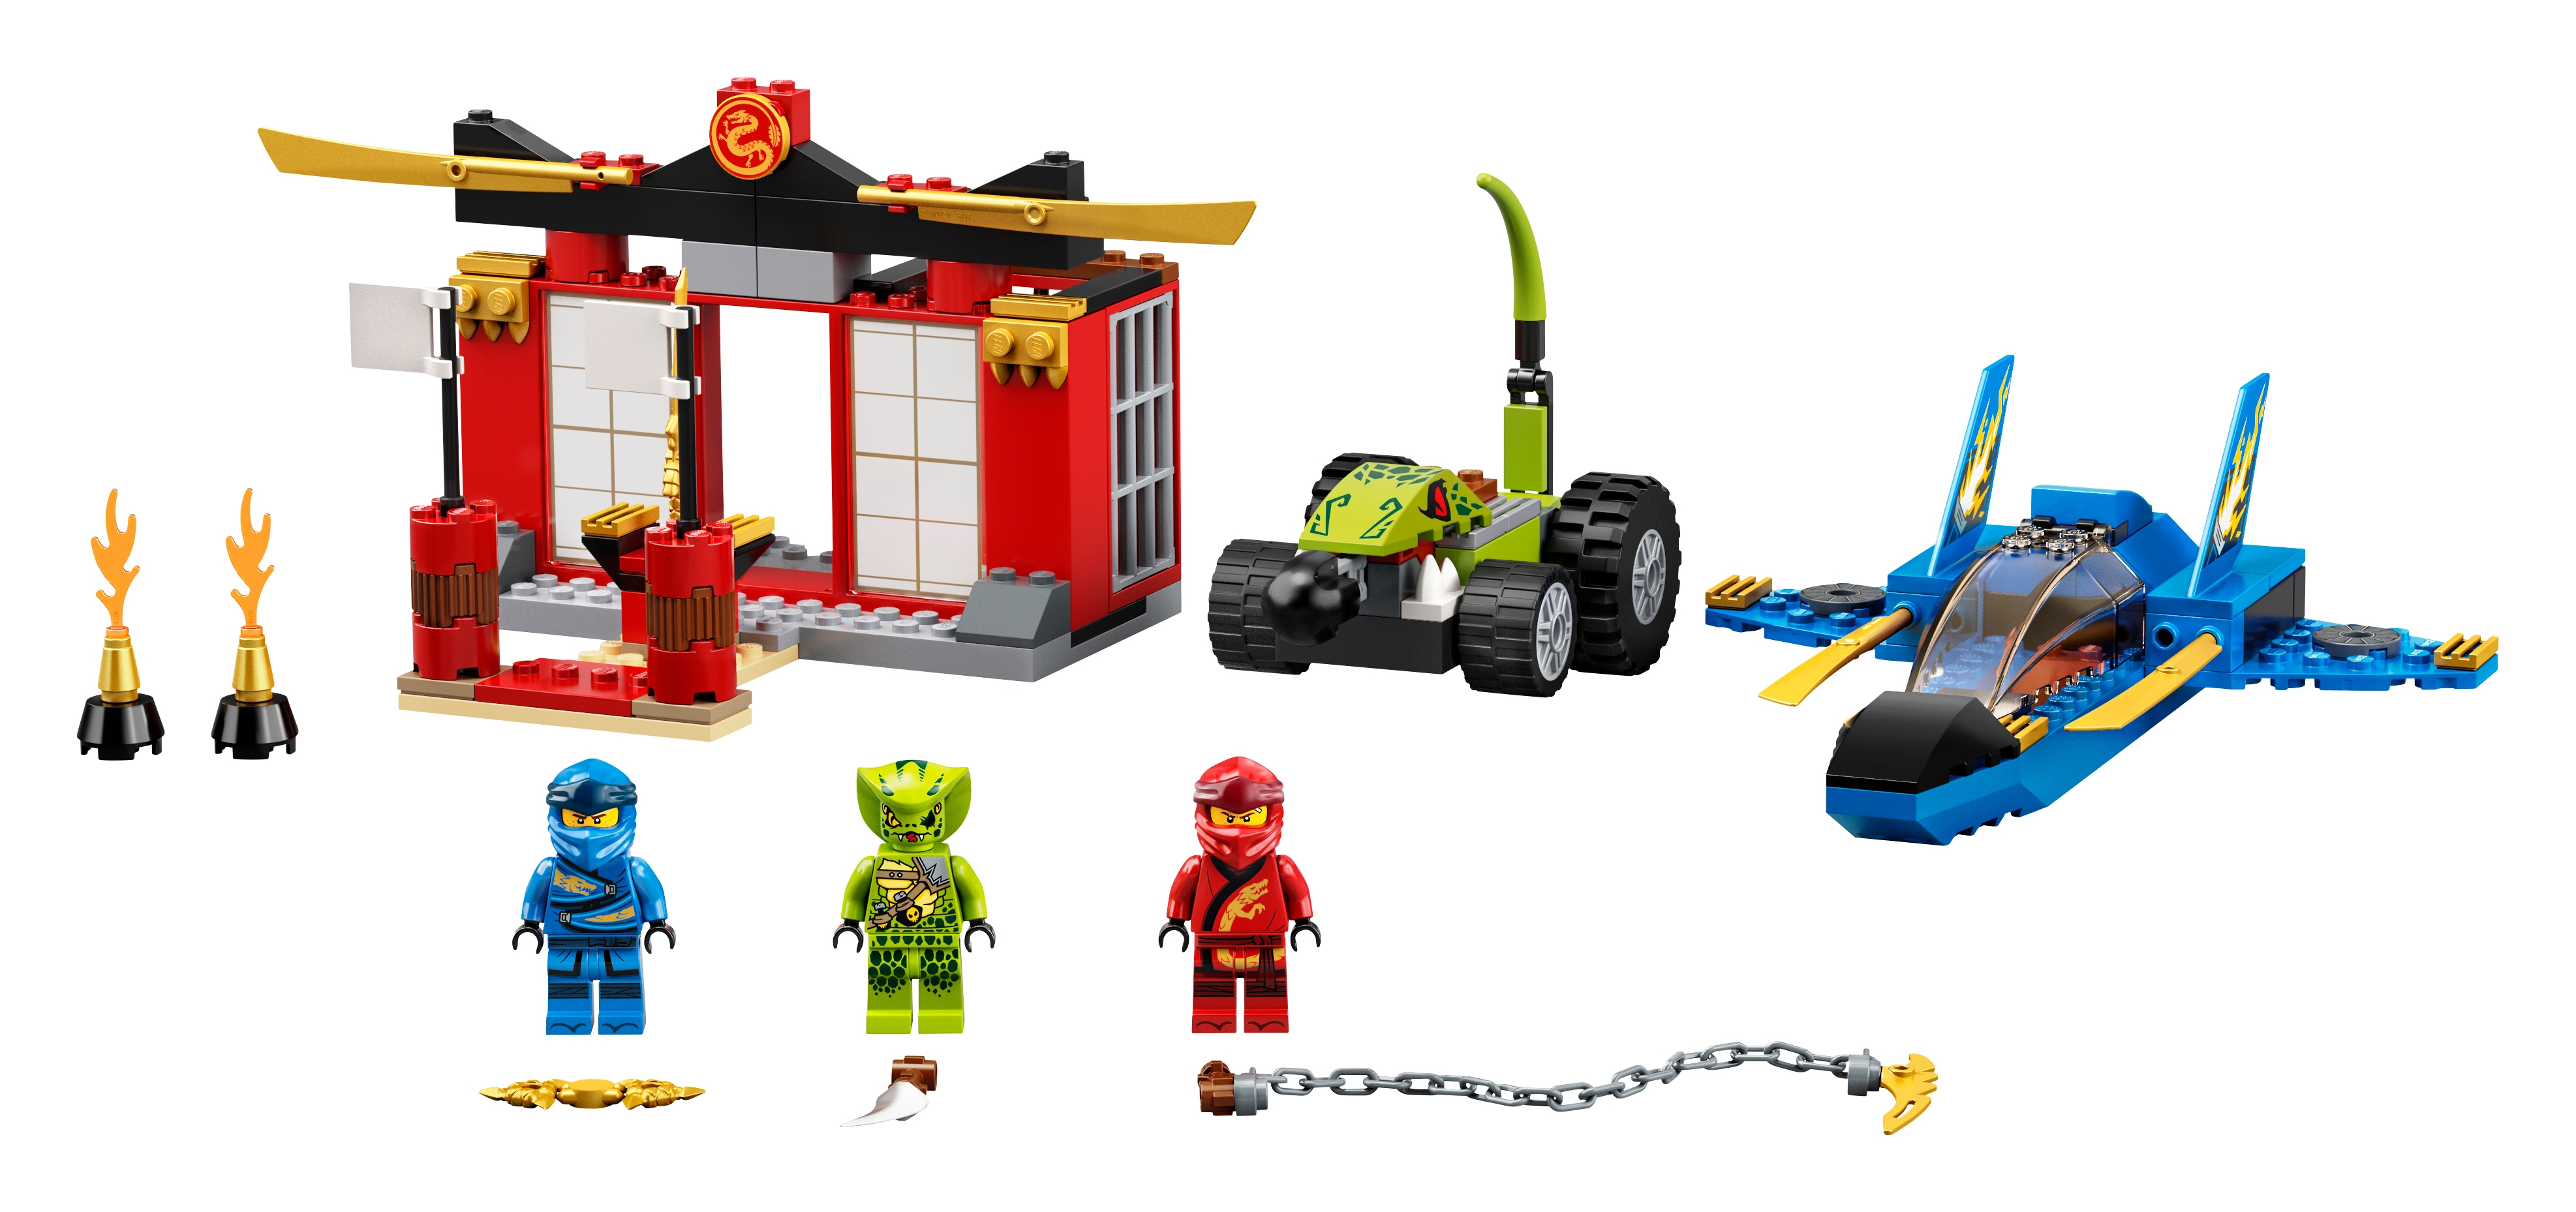 lego kits for 4 year olds